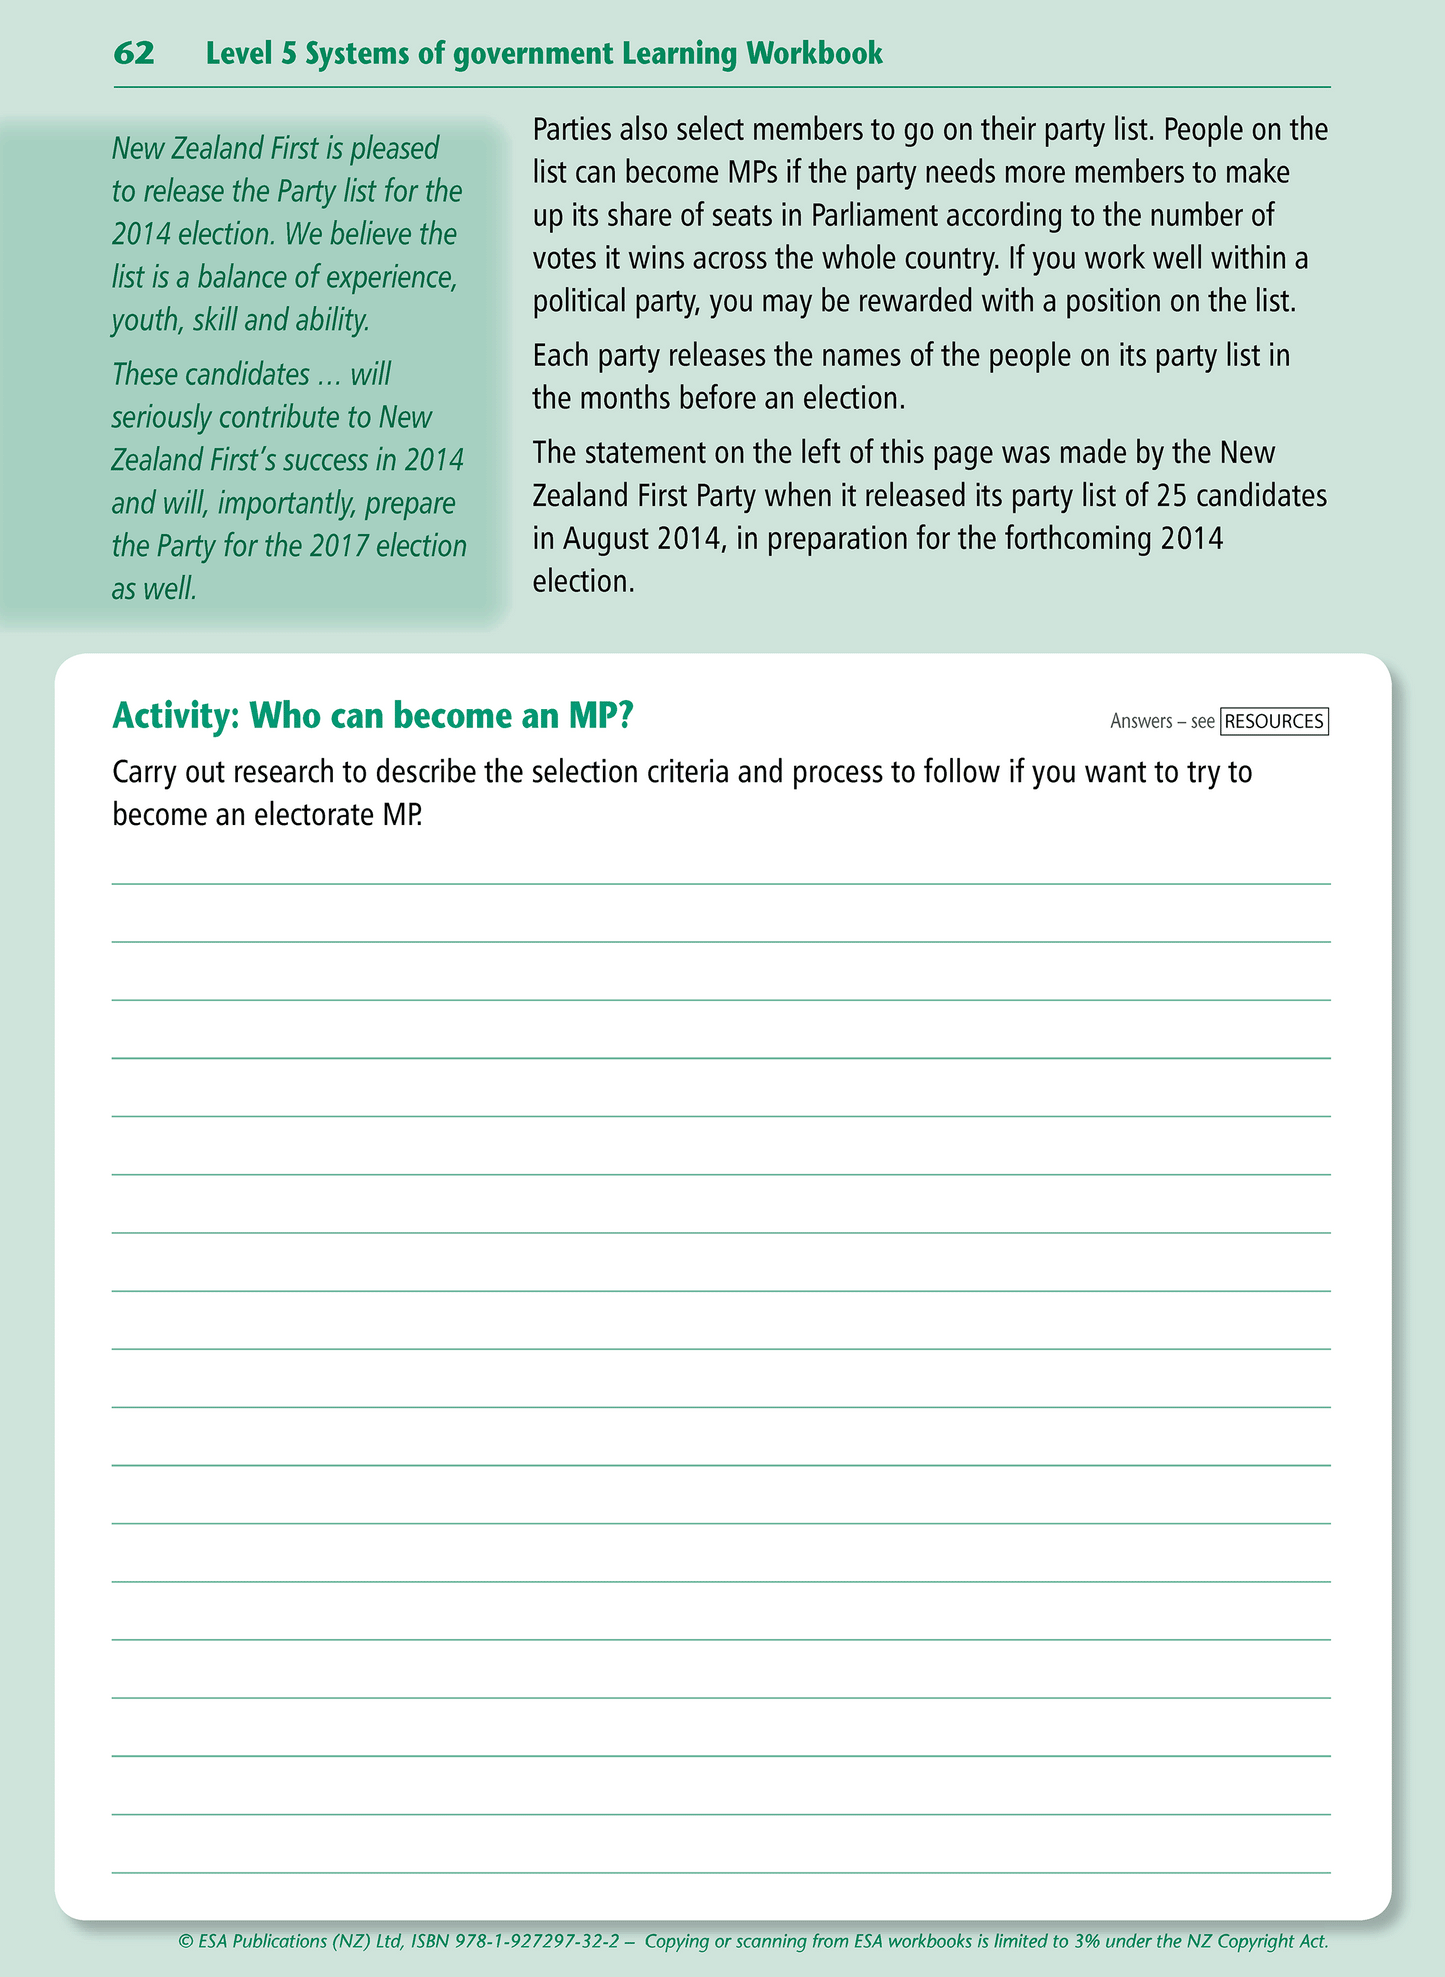 Level 5 Systems of Government Learning Workbook